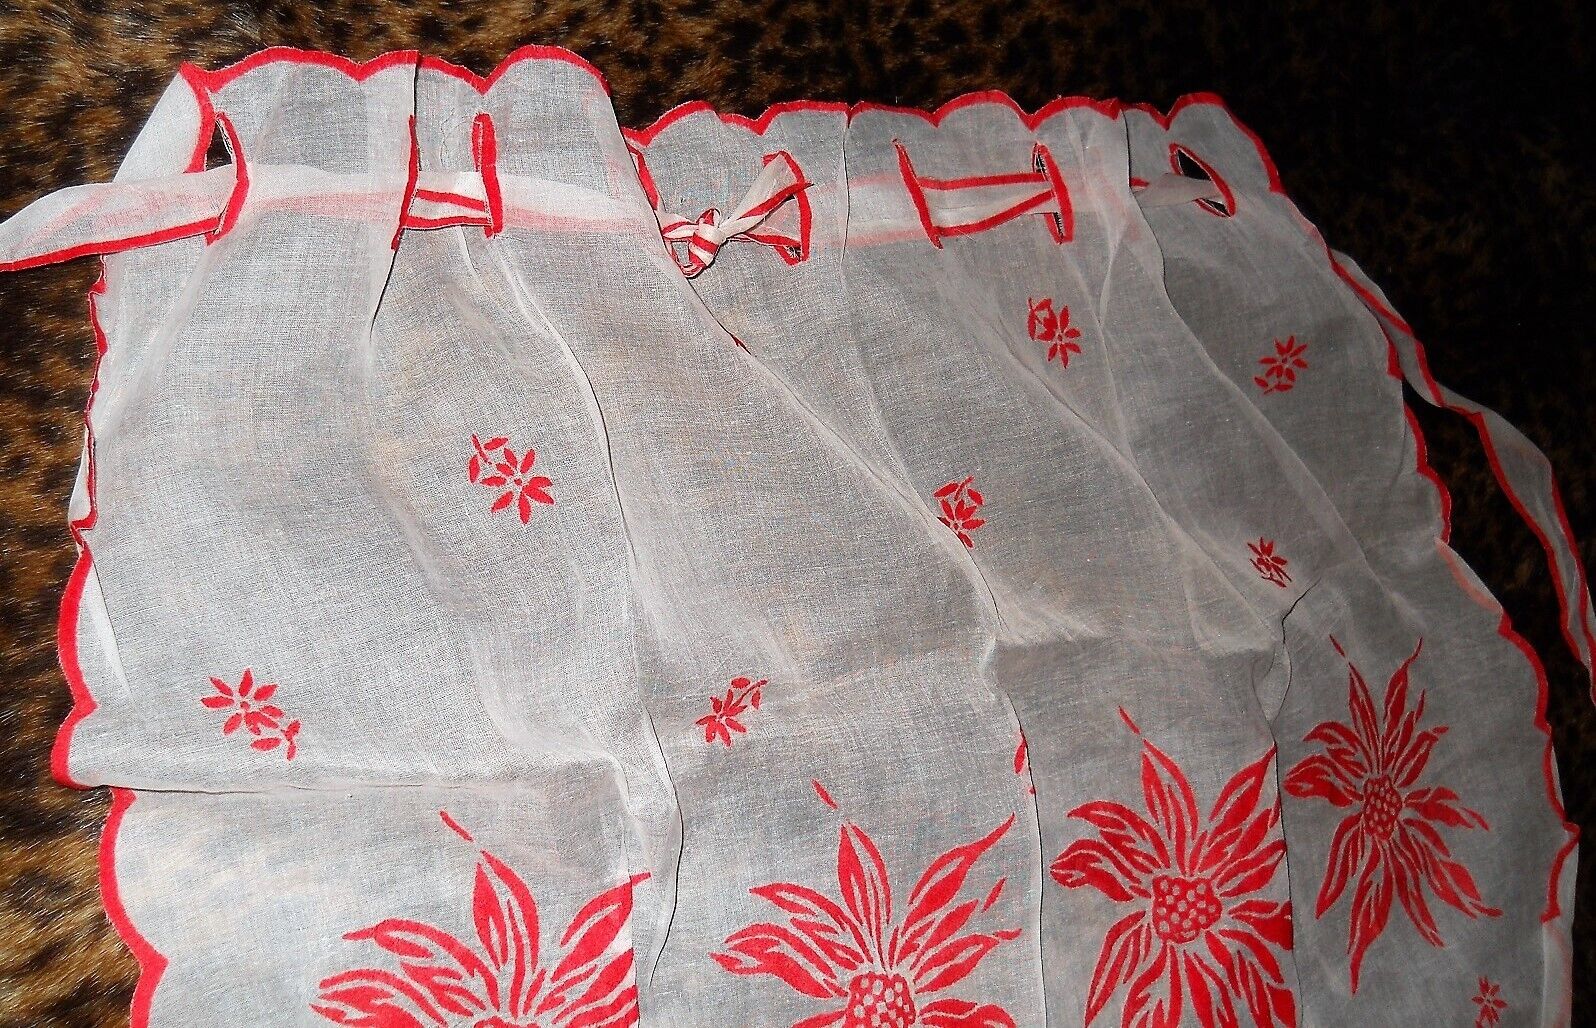 VTG 60s Sheer White Material with Flocked Red Poinsettias - Cute Holiday Apron